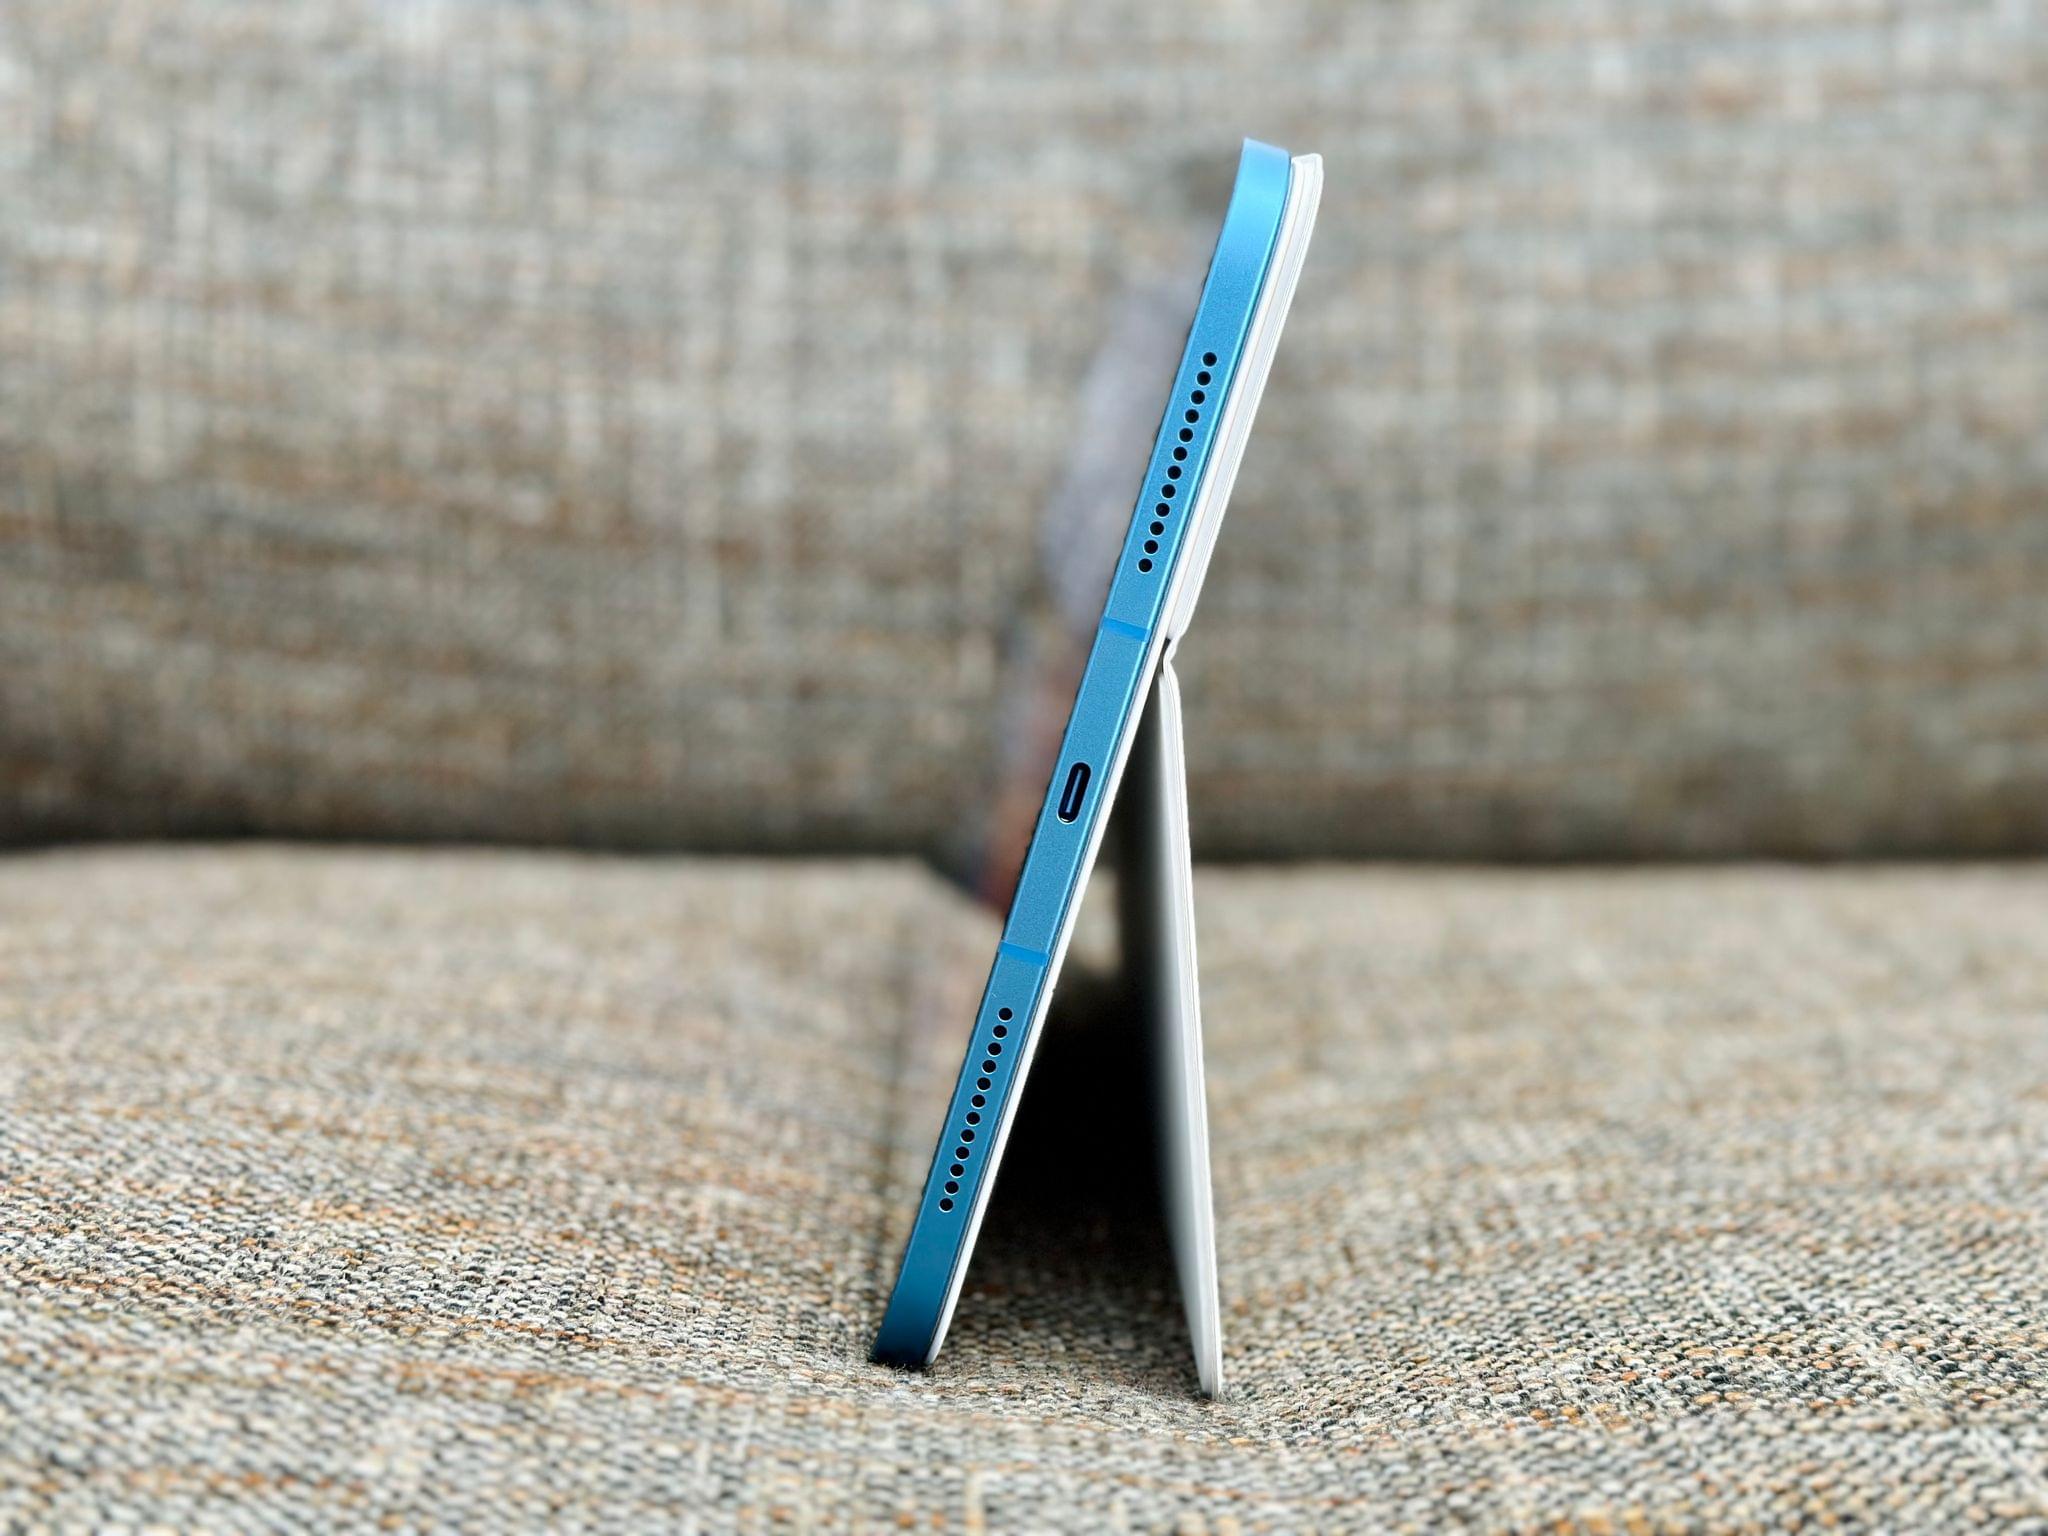 The Folio's angle can be adjusted to an upright position.